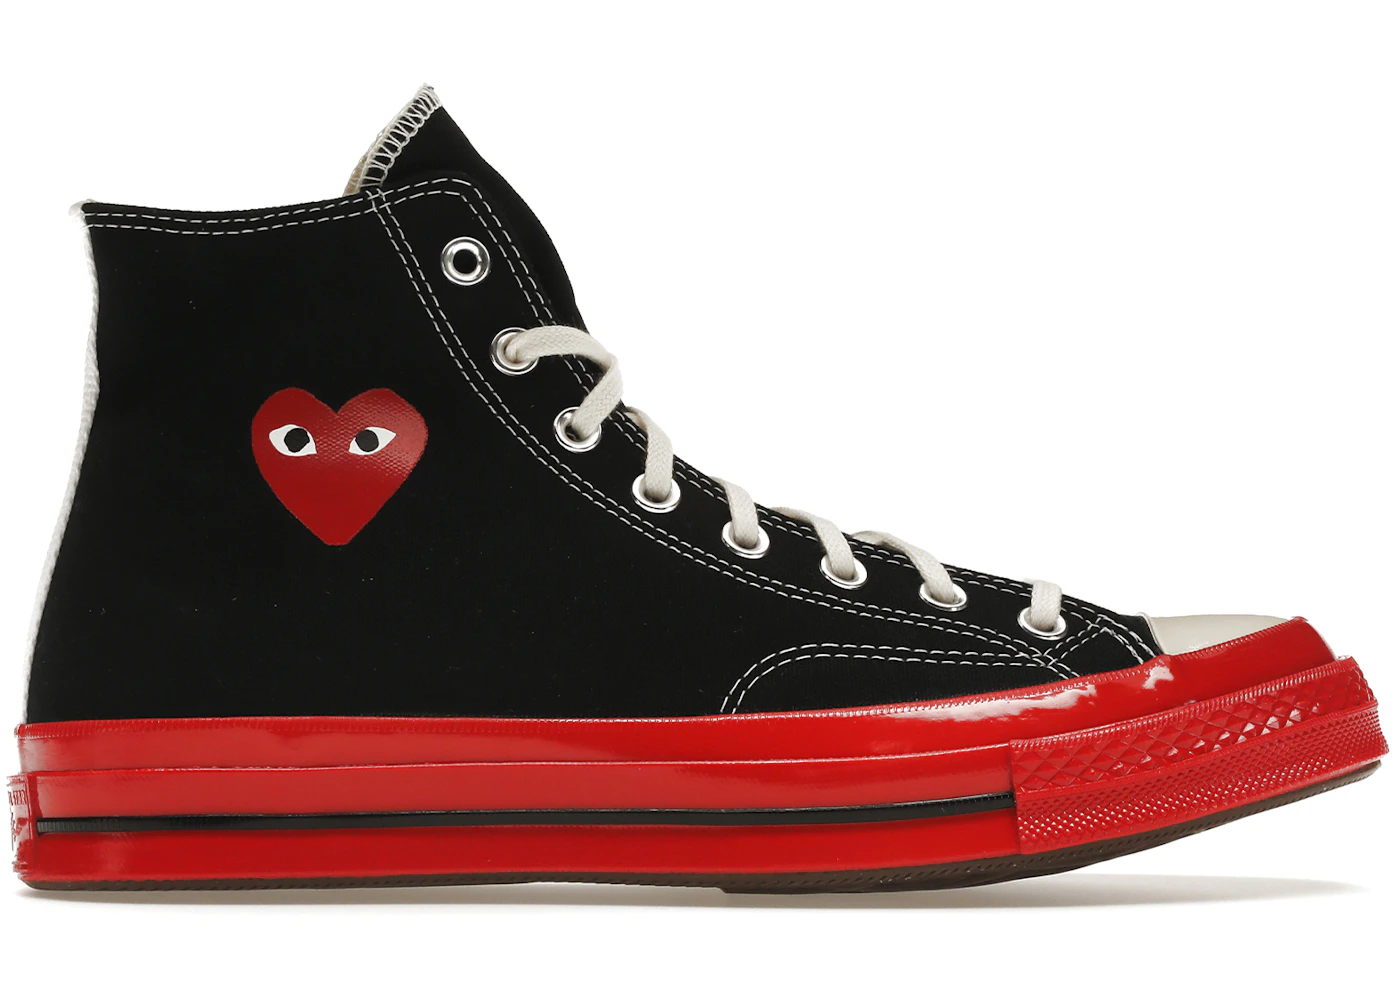 Converse Taylor All-Star 70 Hi Comme des Garcons PLAY Black Red Midsole - A01793C -